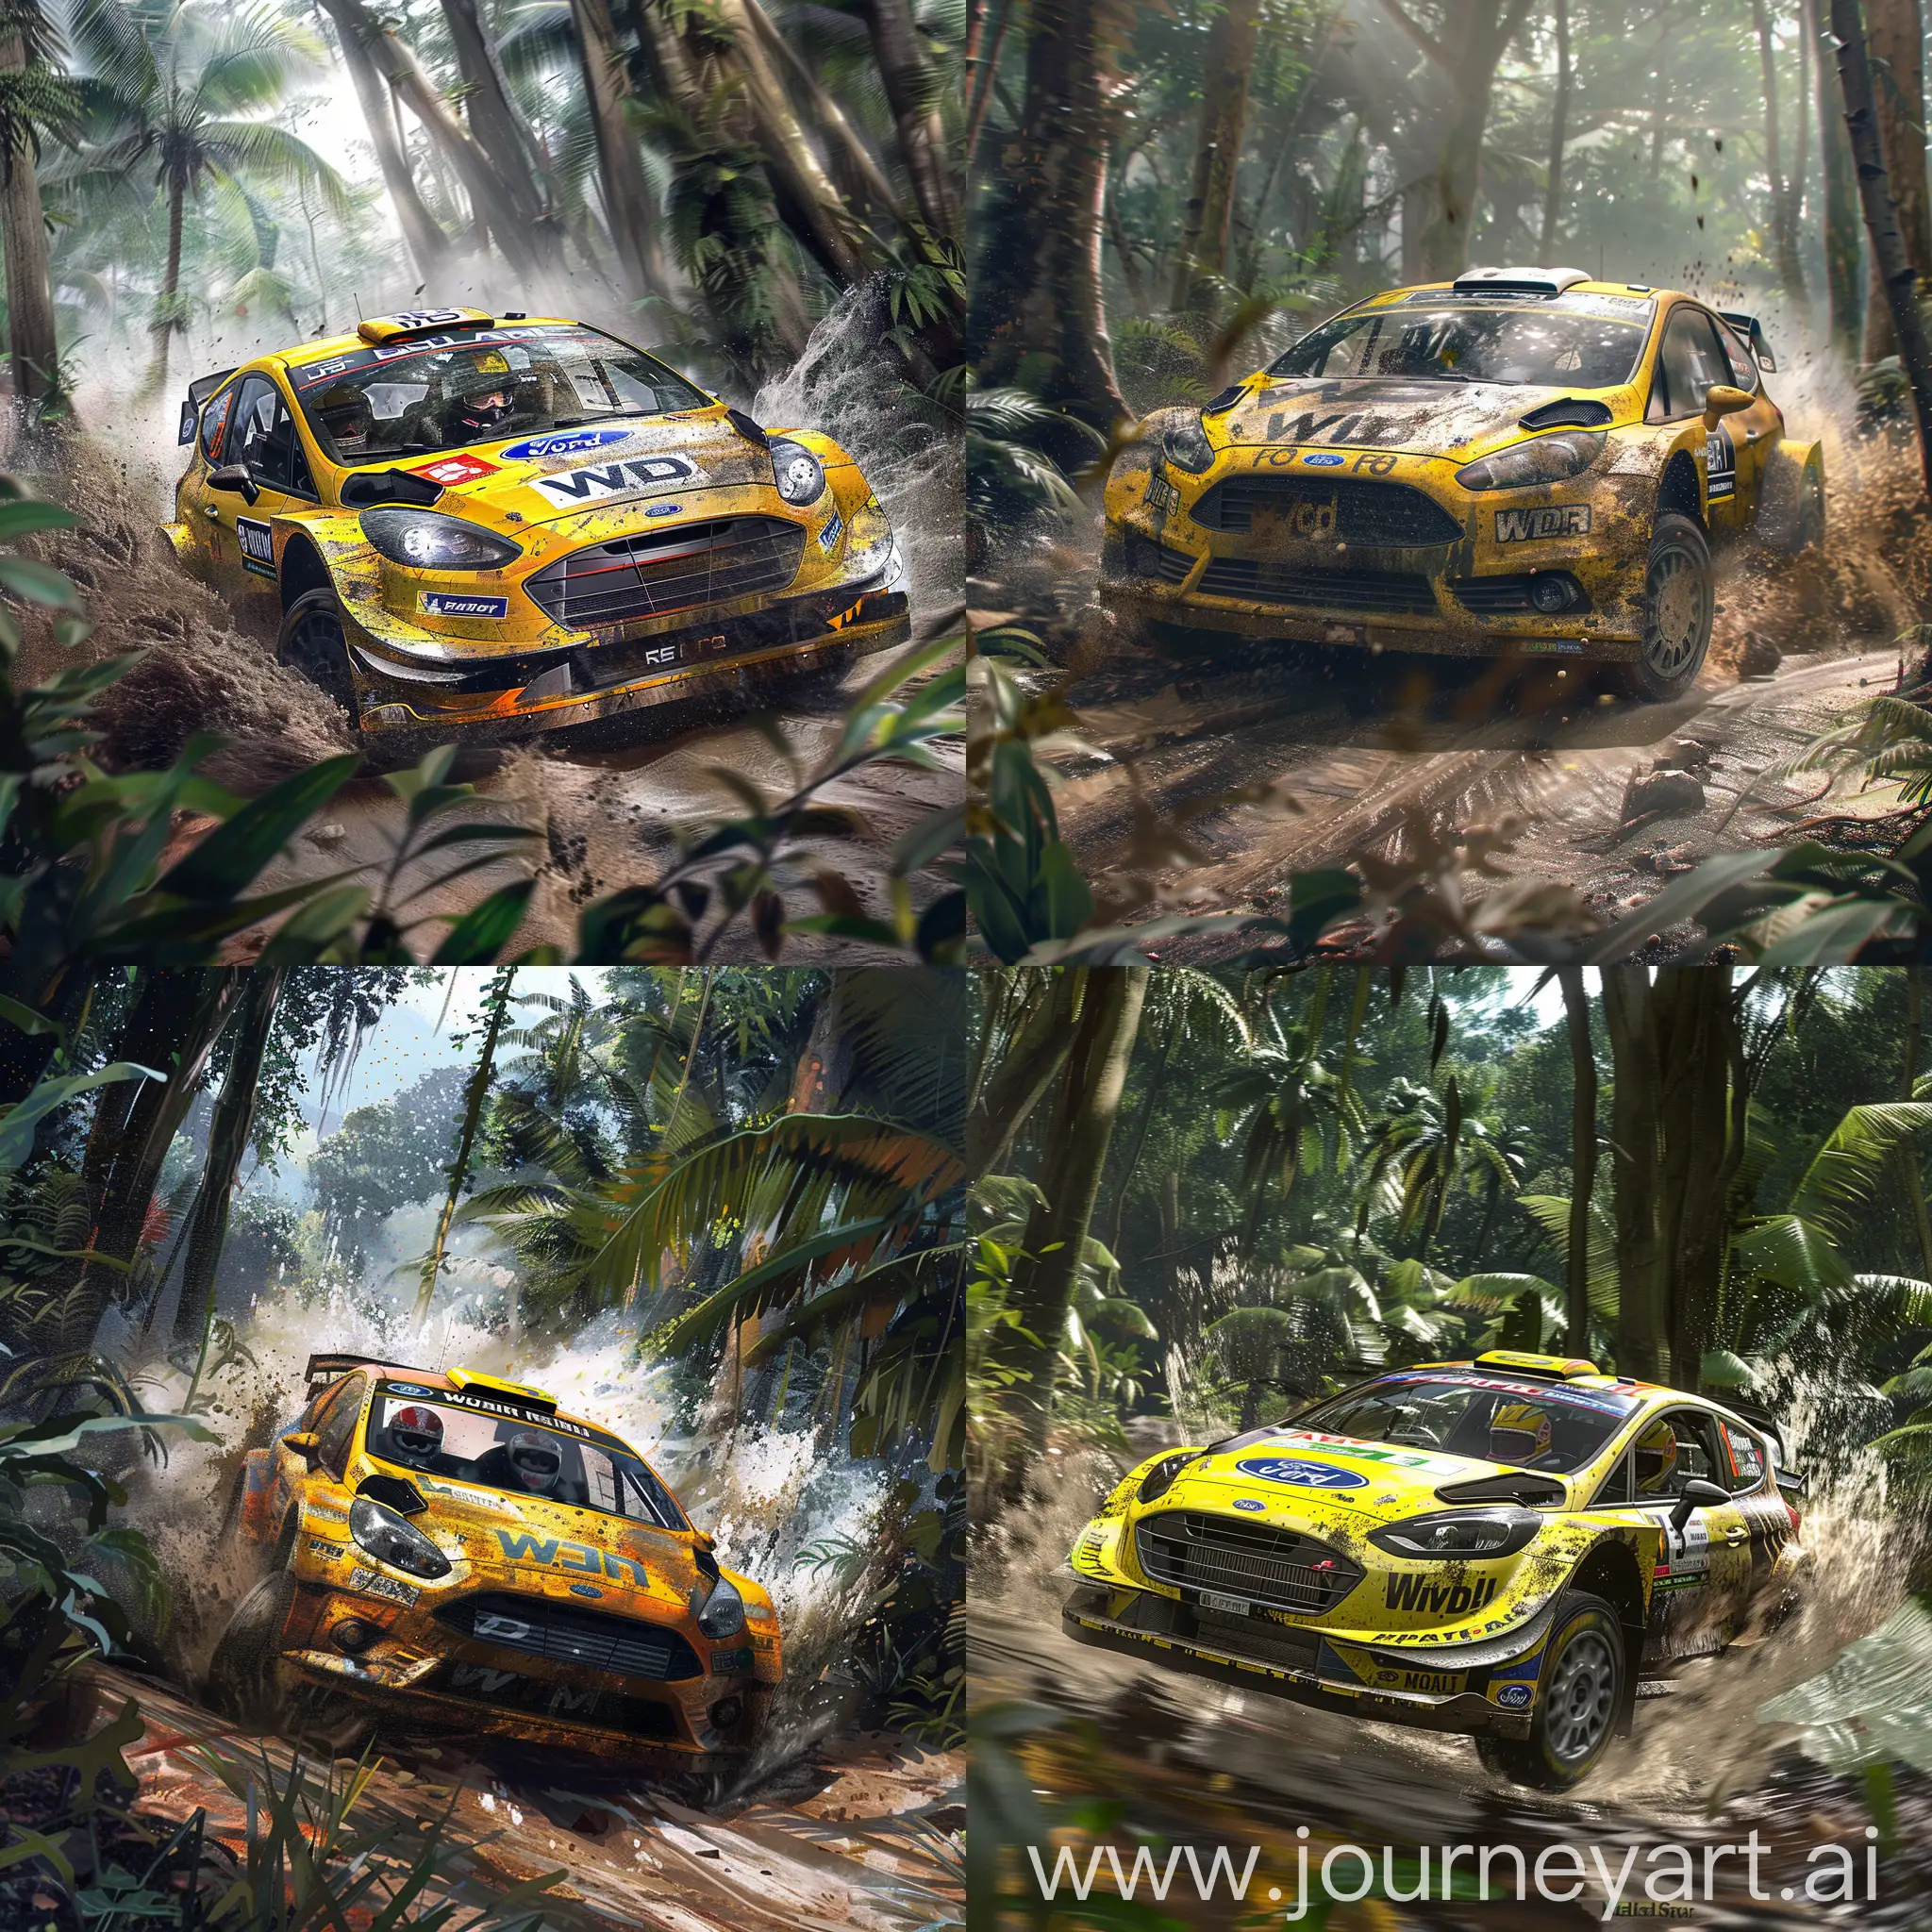 A ford fiesta r5 with a WD-40 livery like from the Dirt 4 game, with a driver and co driver inside the car, clearly visibility from outside, both of them wearing a yellow full face helmet and yellow racing suit. The car is being driven in a jungle rally stage and it has crashed and starting to barrel roll. In a realistic style